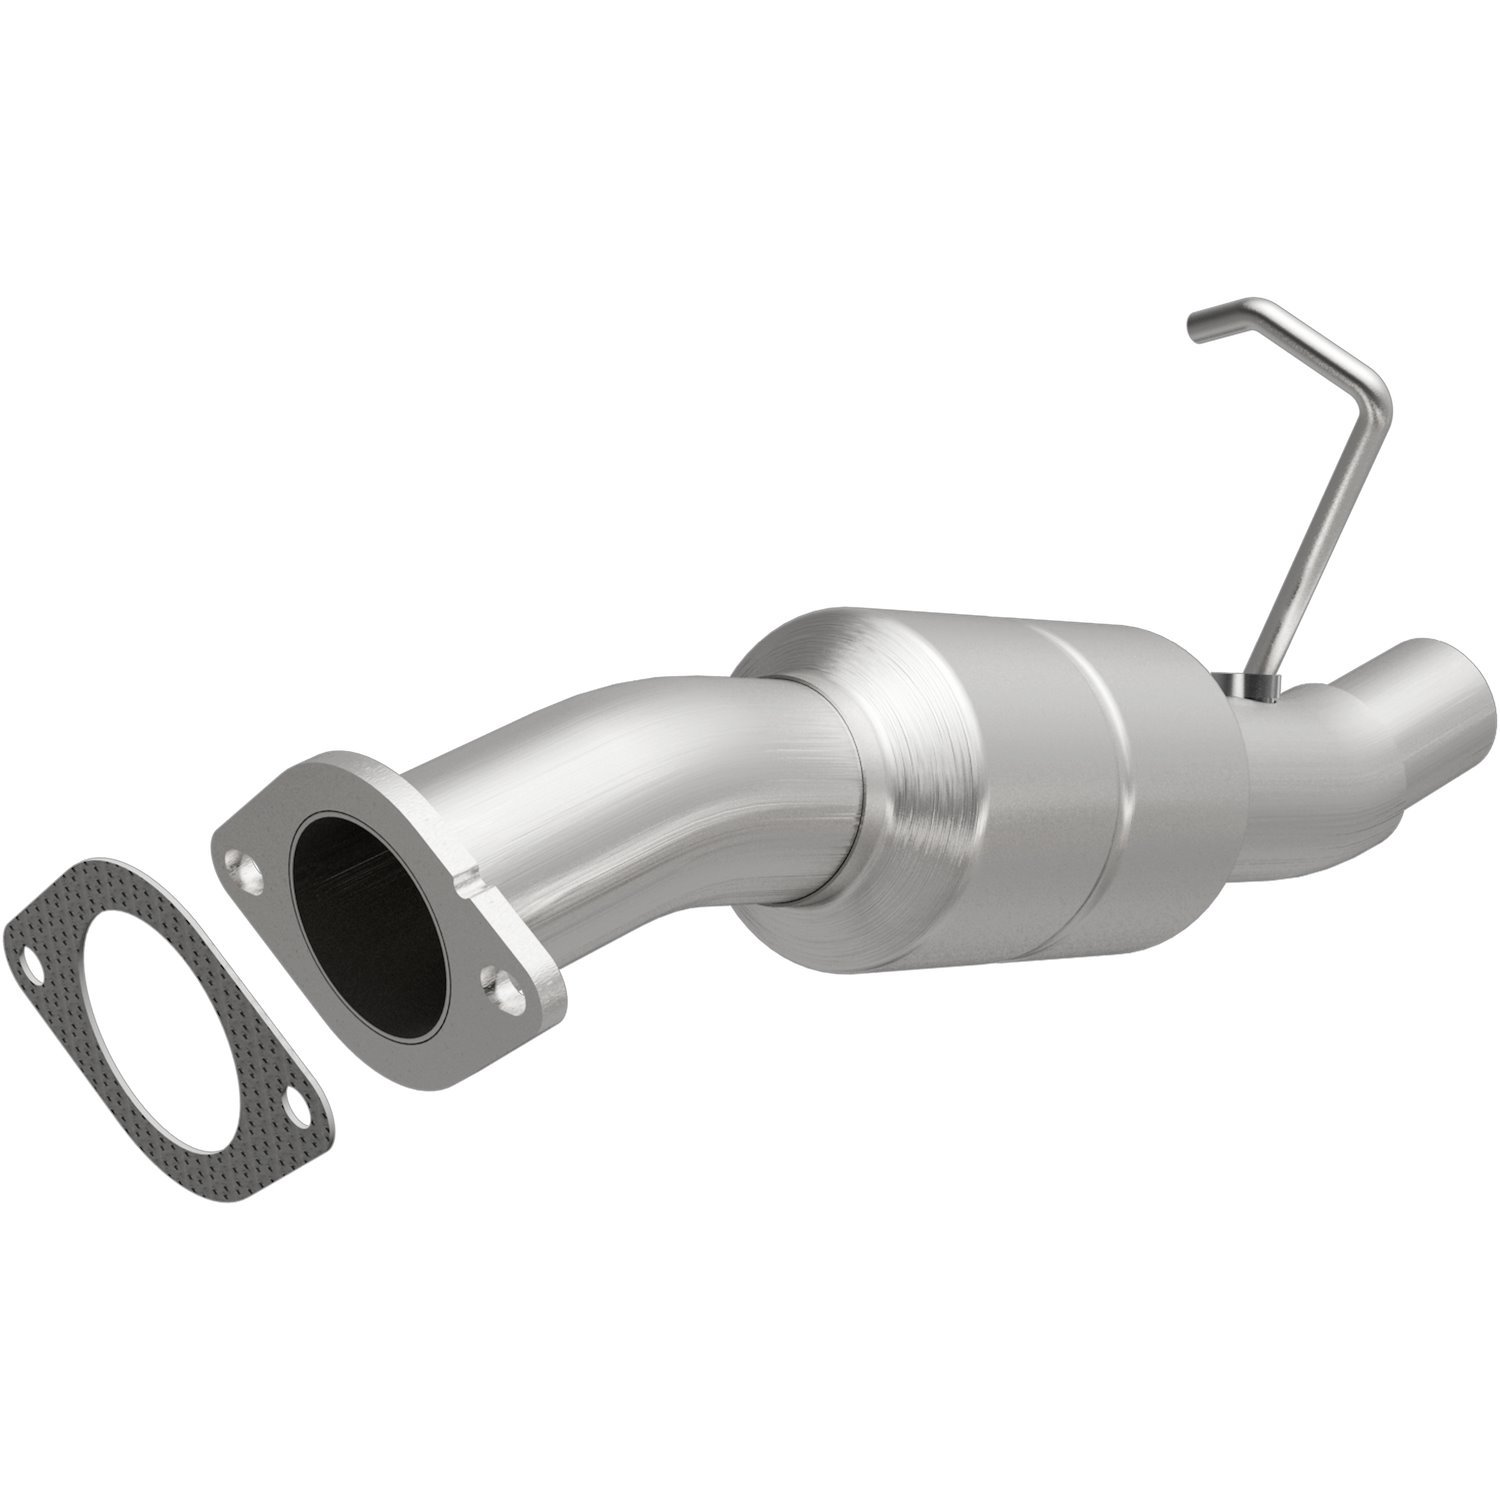 OEM Grade Federal / EPA Compliant Direct-Fit Catalytic Converter 49006